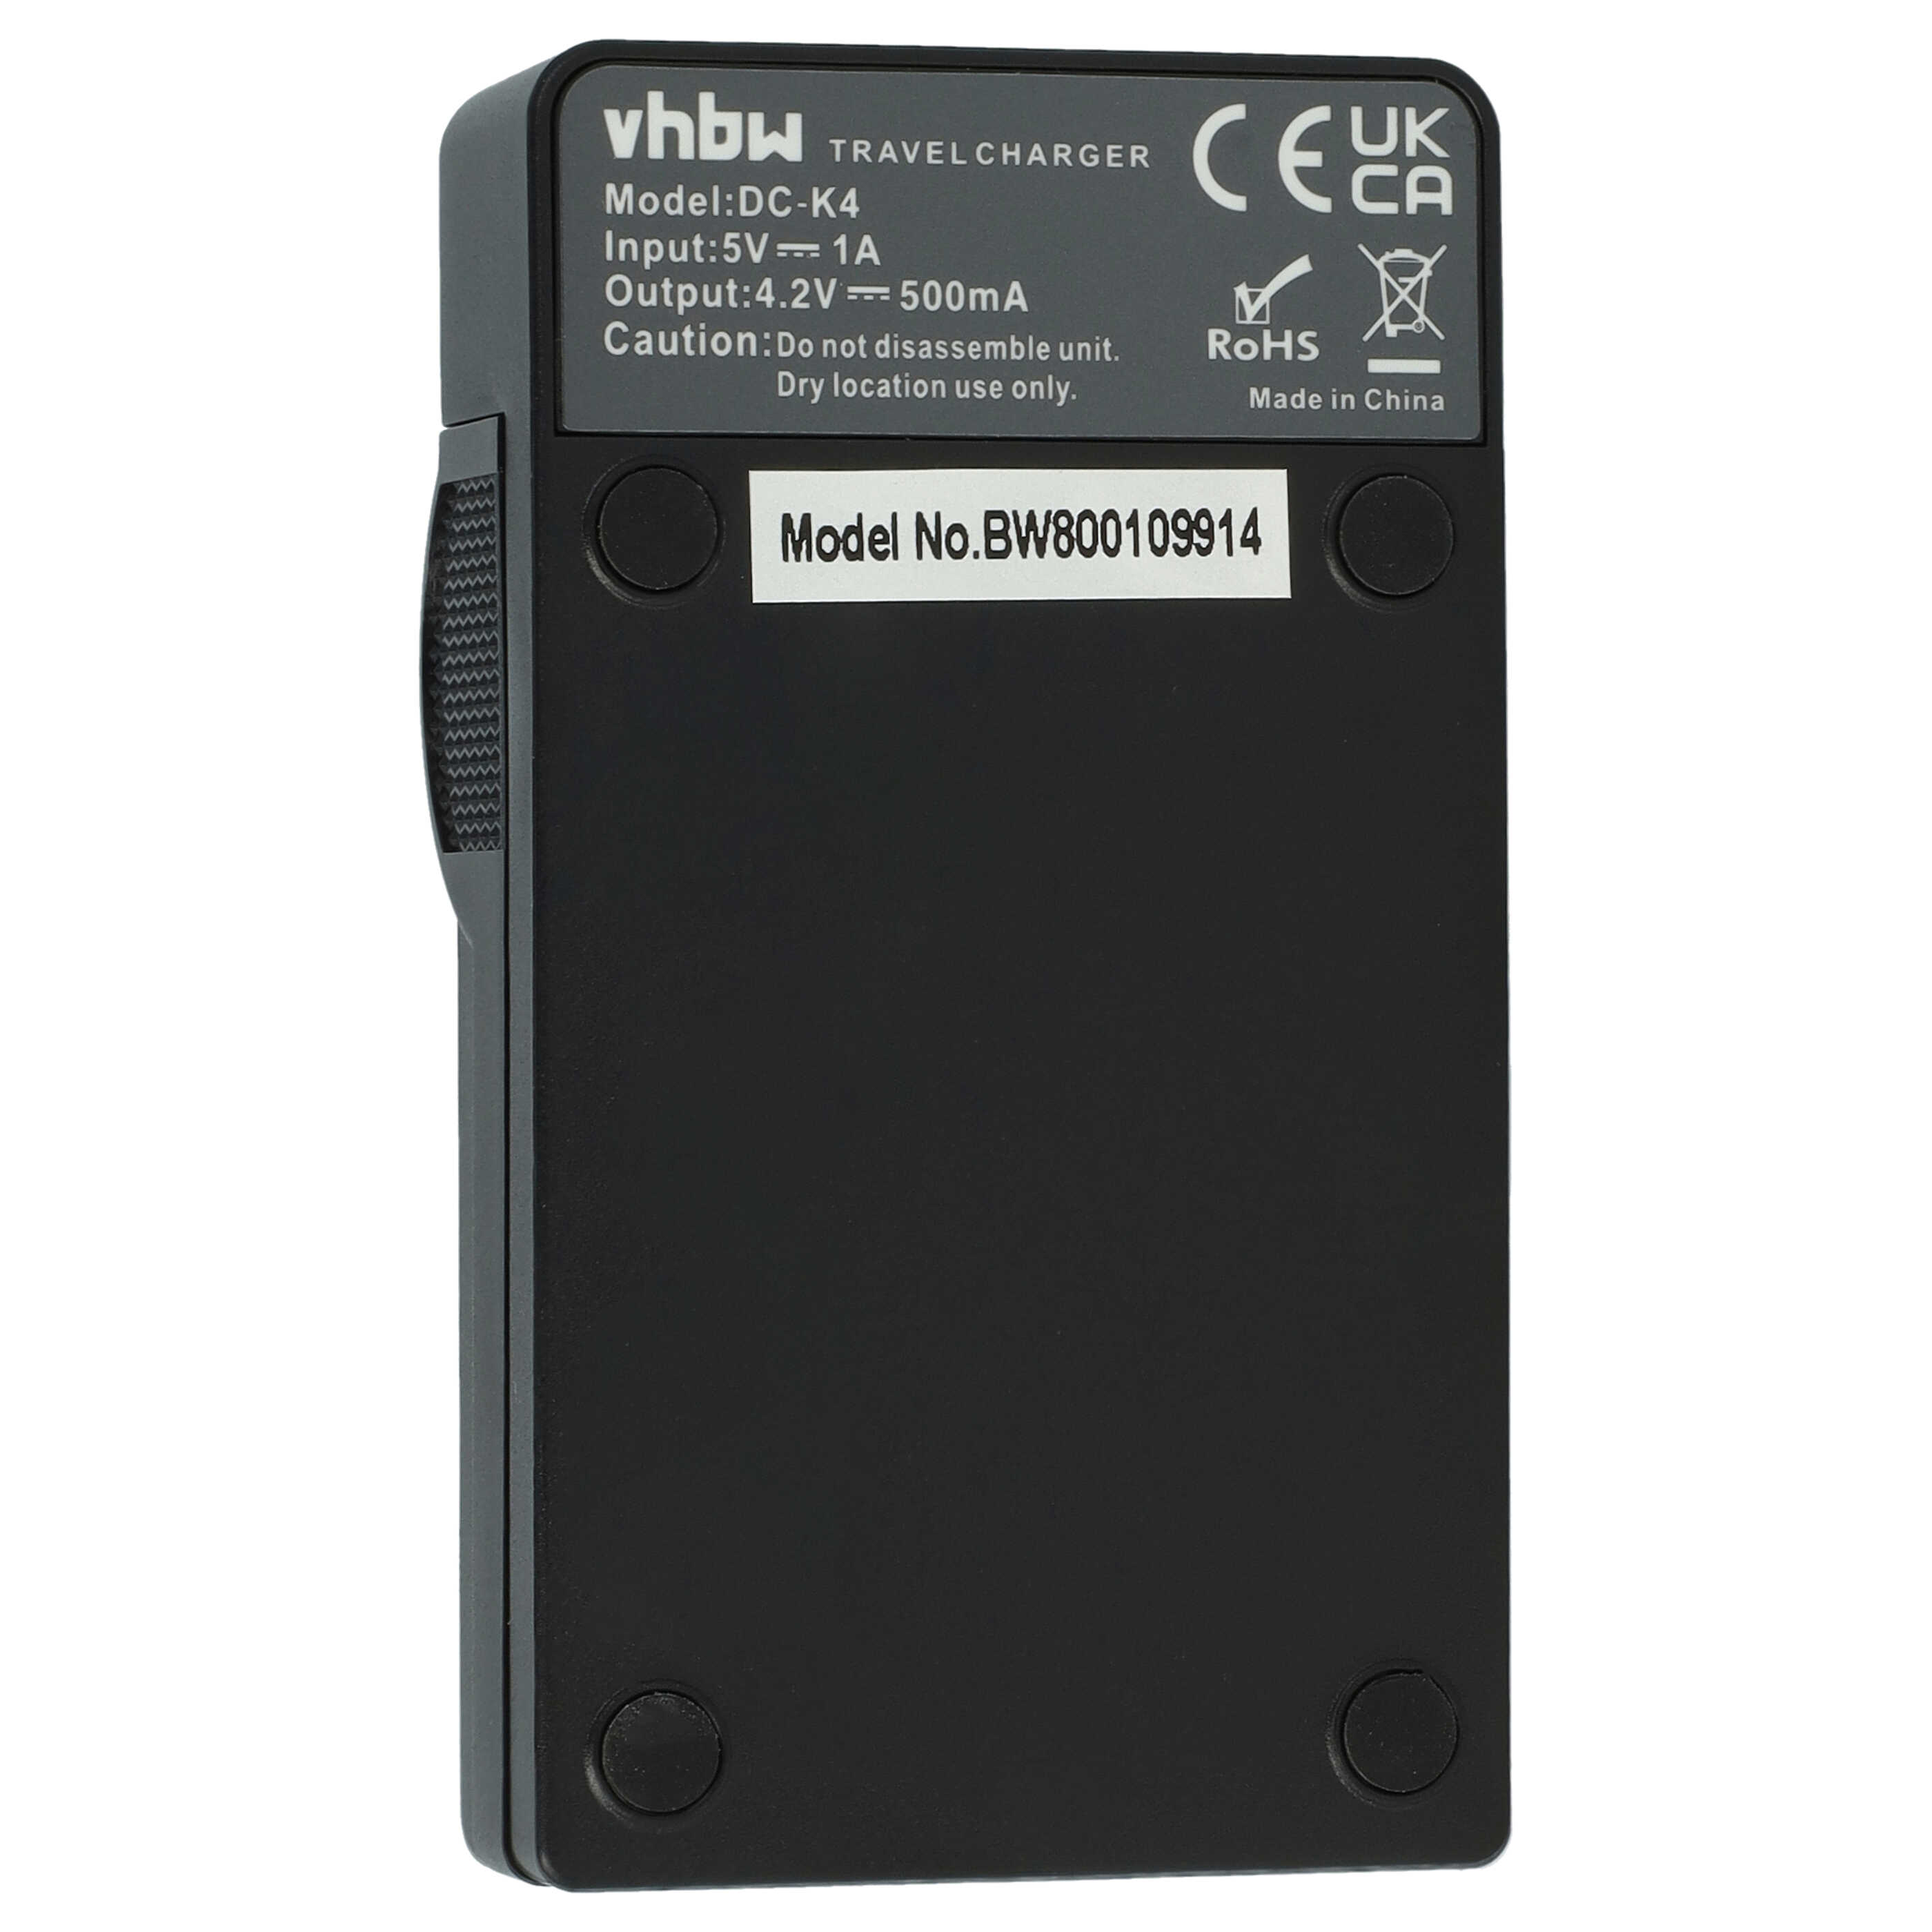 Battery Charger suitable for Samsung SLB-0837B Camera etc. - 0.5 A, 4.2 V